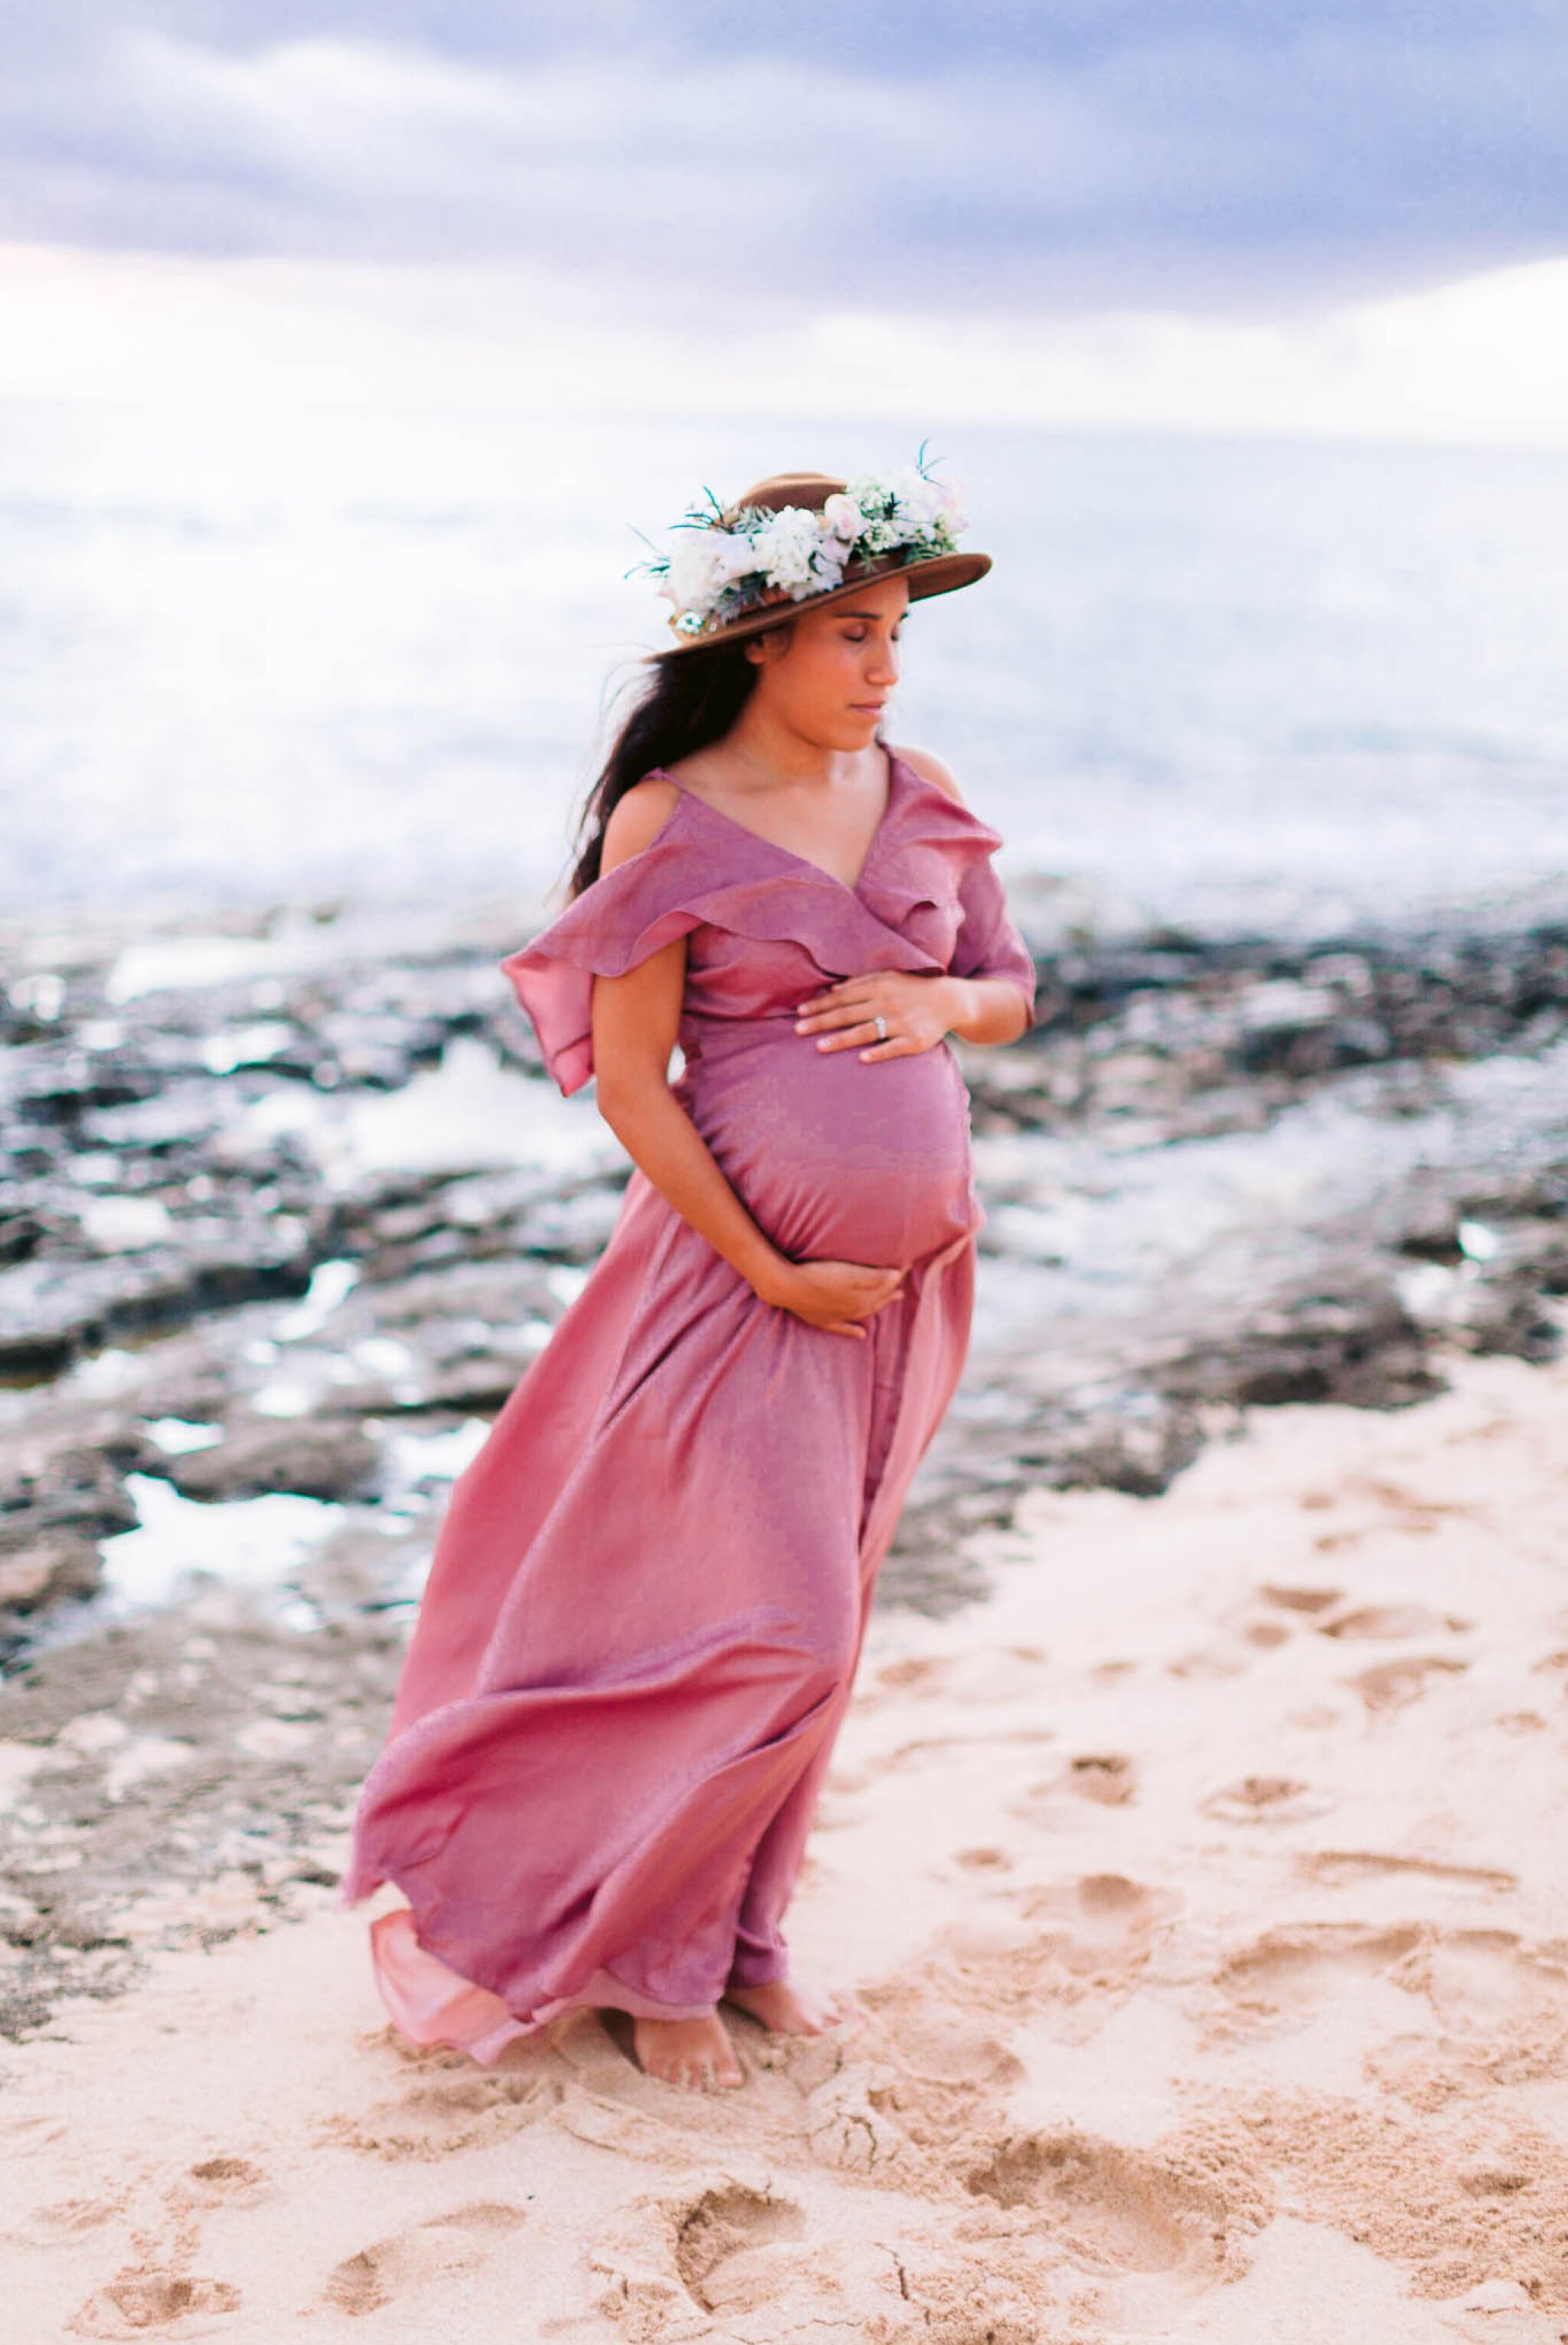 Ruth - Maternity Photography Session at Maili Beach Park, West side oahu - hawaii family photographer 25.jpg